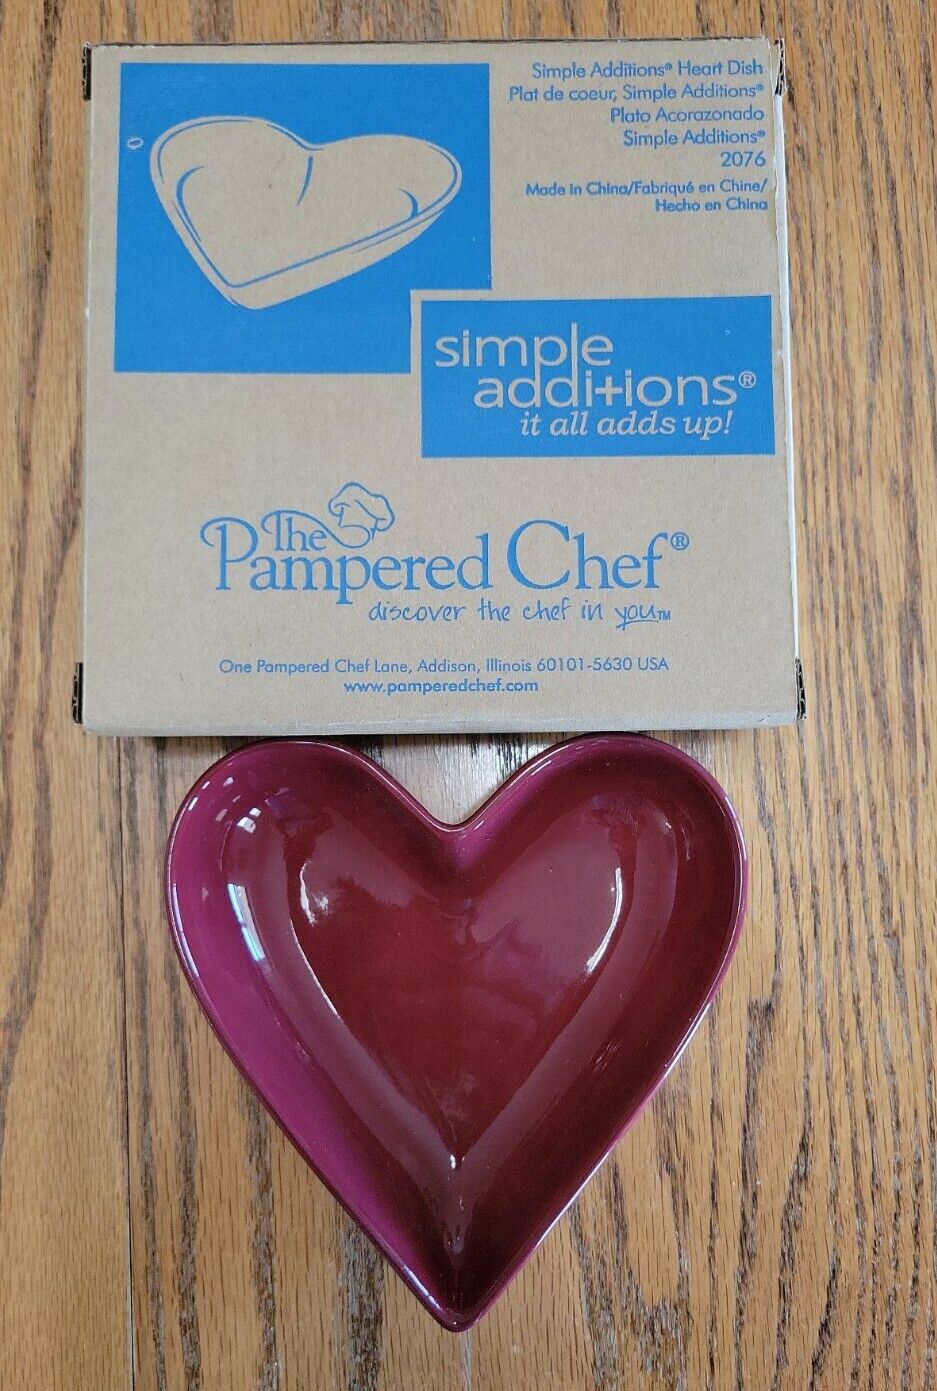 The Pampered Chef Simple Additions Heart Dish 2076